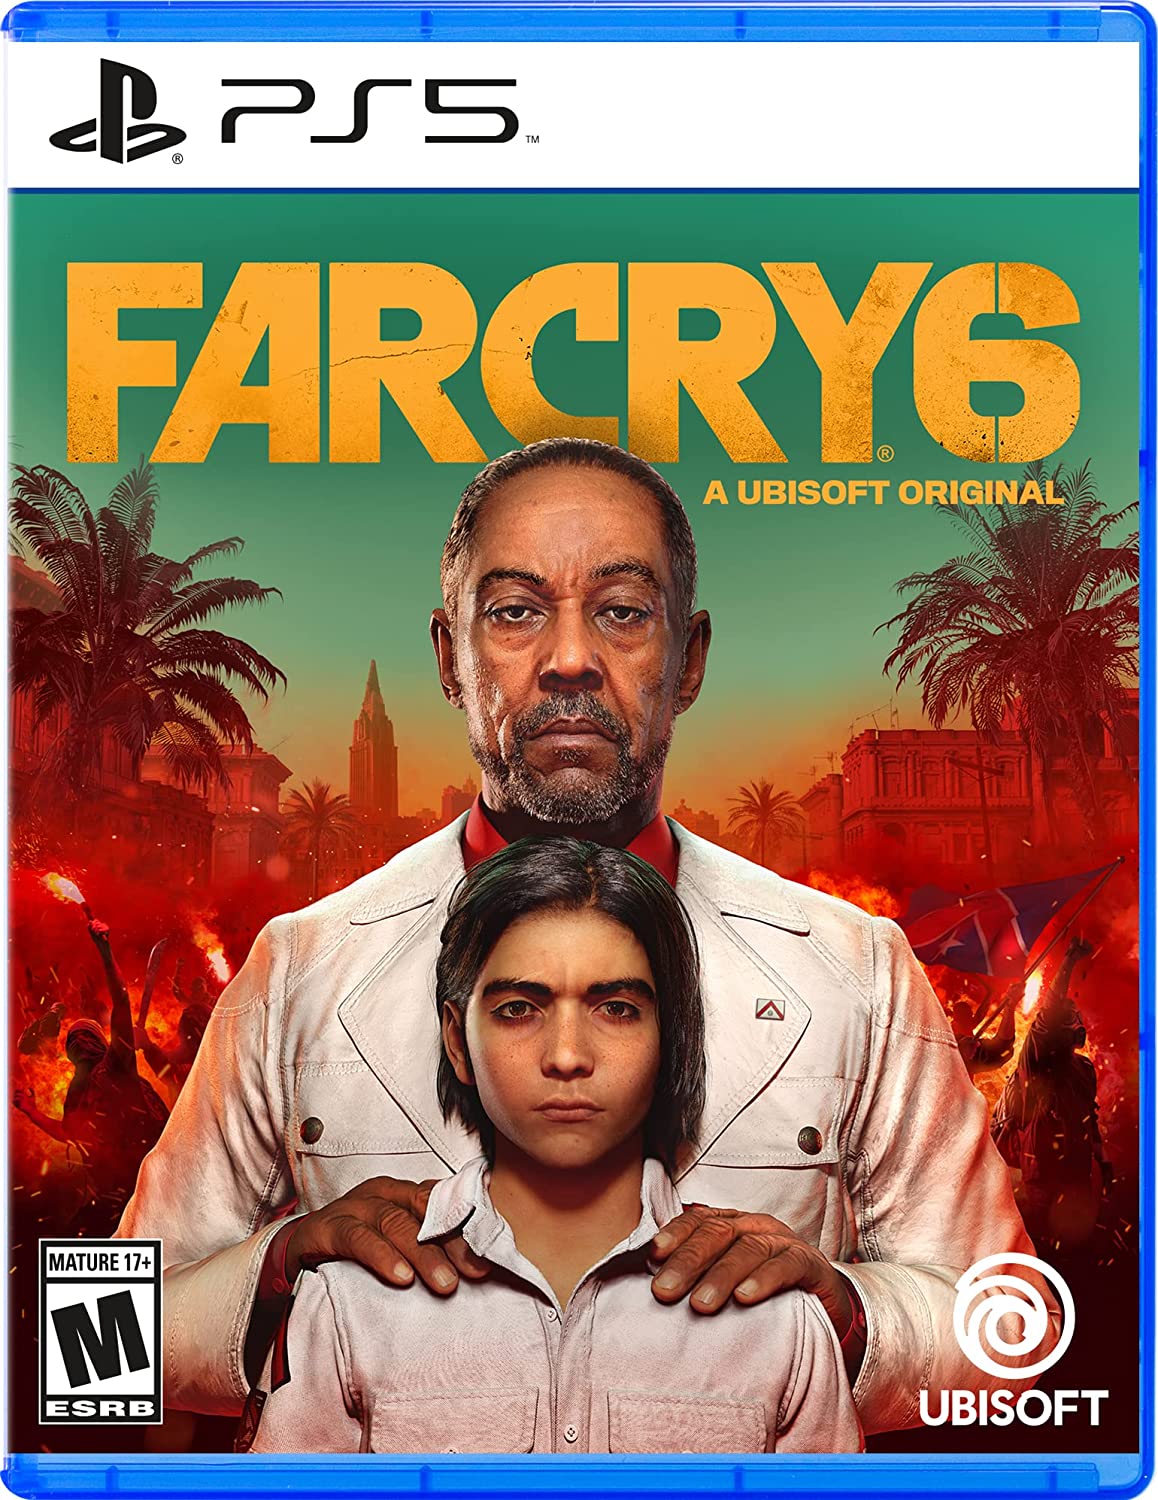 Farcry 6 (Sealed) - Darkside Records